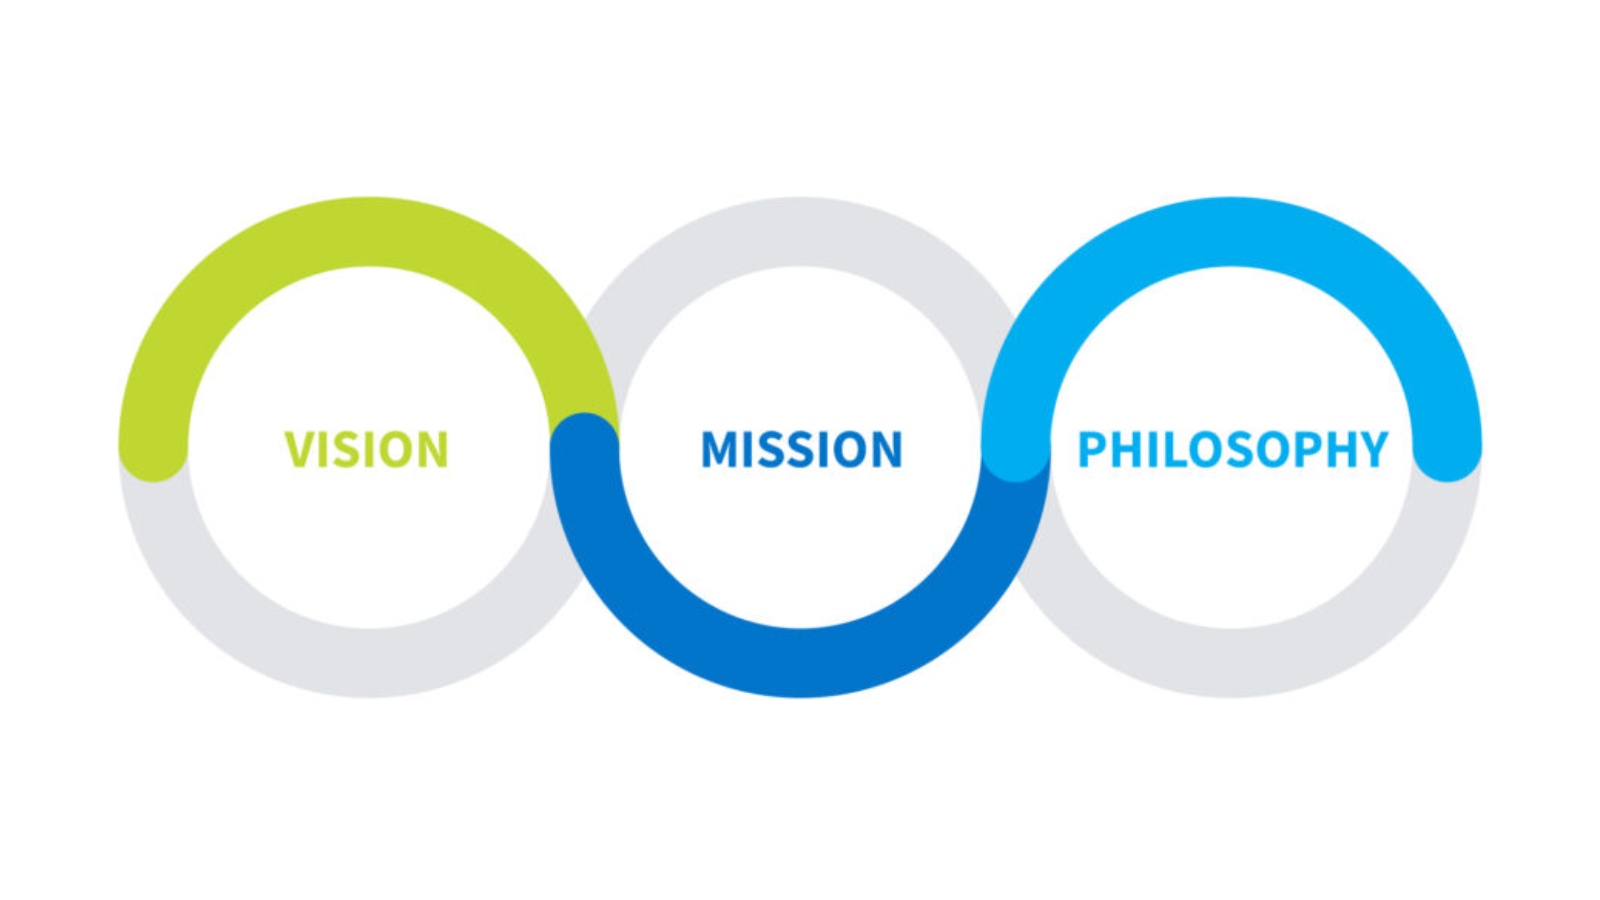 Graphic of vision, mission, and philosophy intertwined with each other